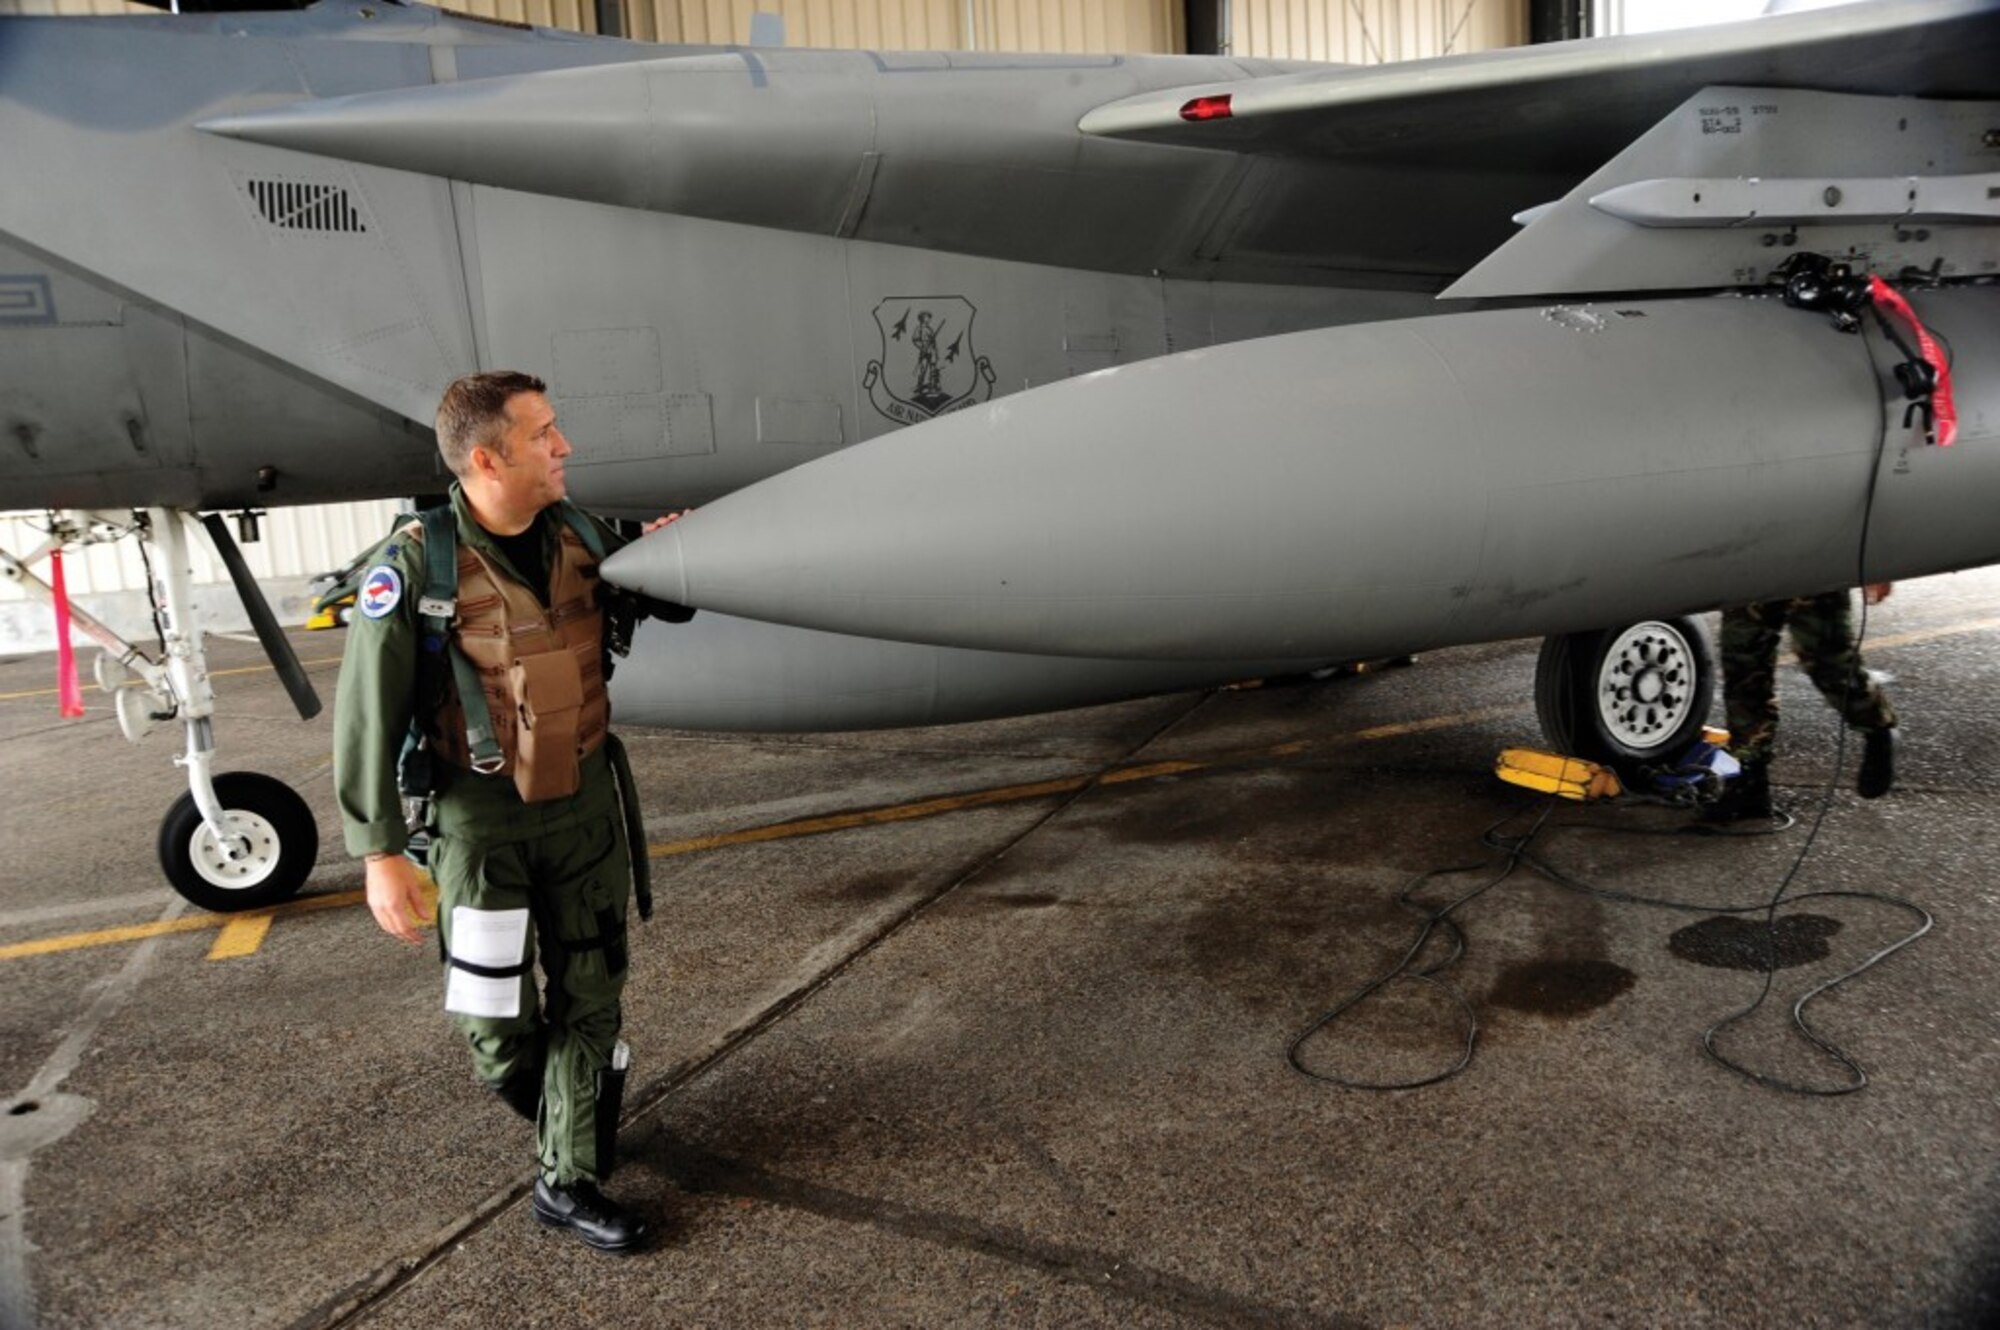 US Air Force Lt. Col. Steve Beauchamp of the 123rd Figther Squardron, 142nd Fighter Wing preformes a final preflight inspection before for a morning flight to Davis-Monthan Air Force Base on September 16th, 2009. Beauchamp will fly F-15A model aircraft tail number 77-098 to the “Bone Yard” and is the last active F-15A model airframe left in the Active Air Force inventory. (US Air Force photograph by Staff Sgt. John Hughel)